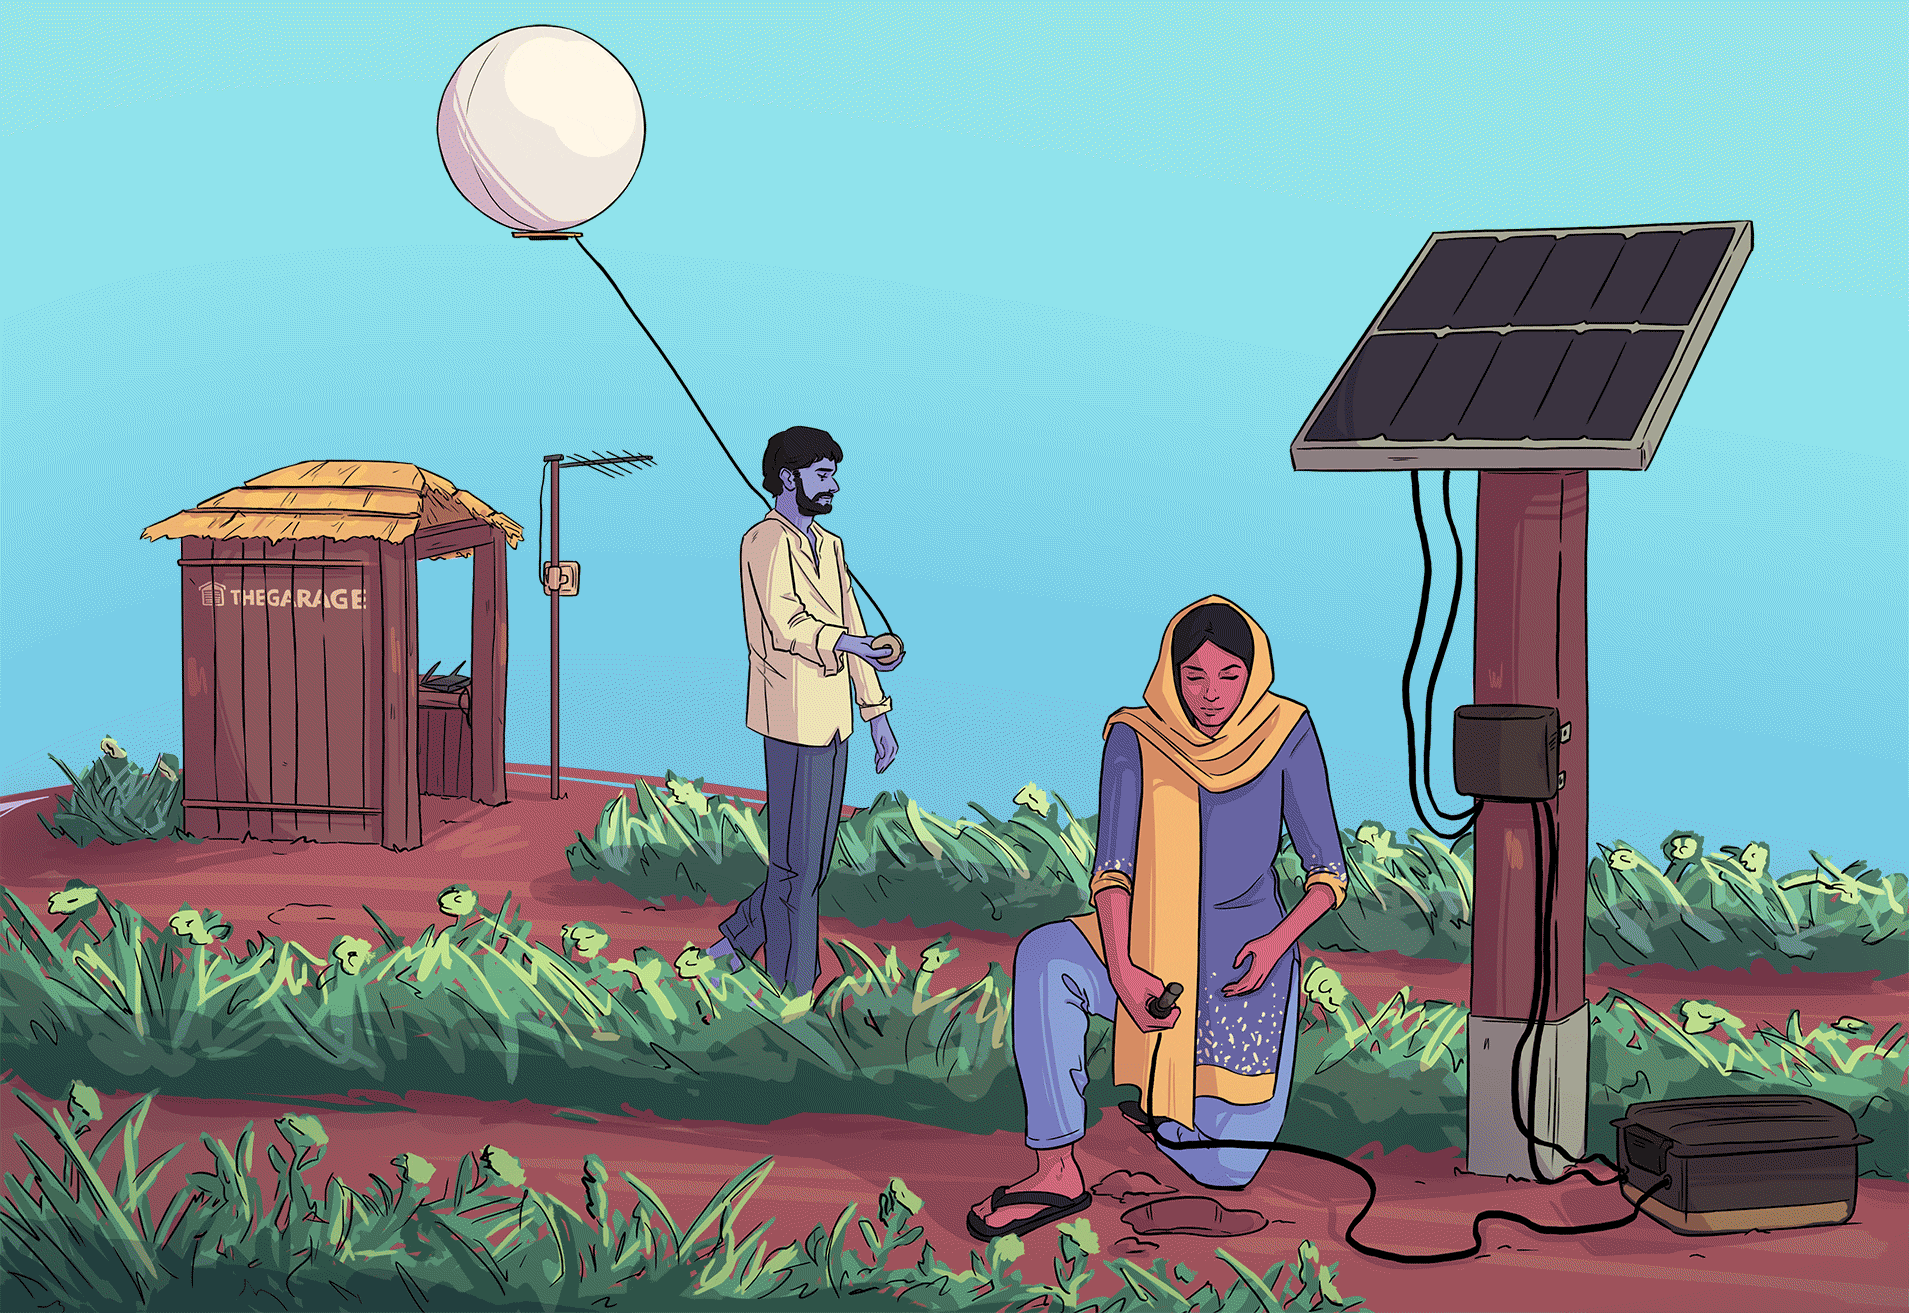 Illustration of a man and woman using connected devices to monitor crops on a farm.